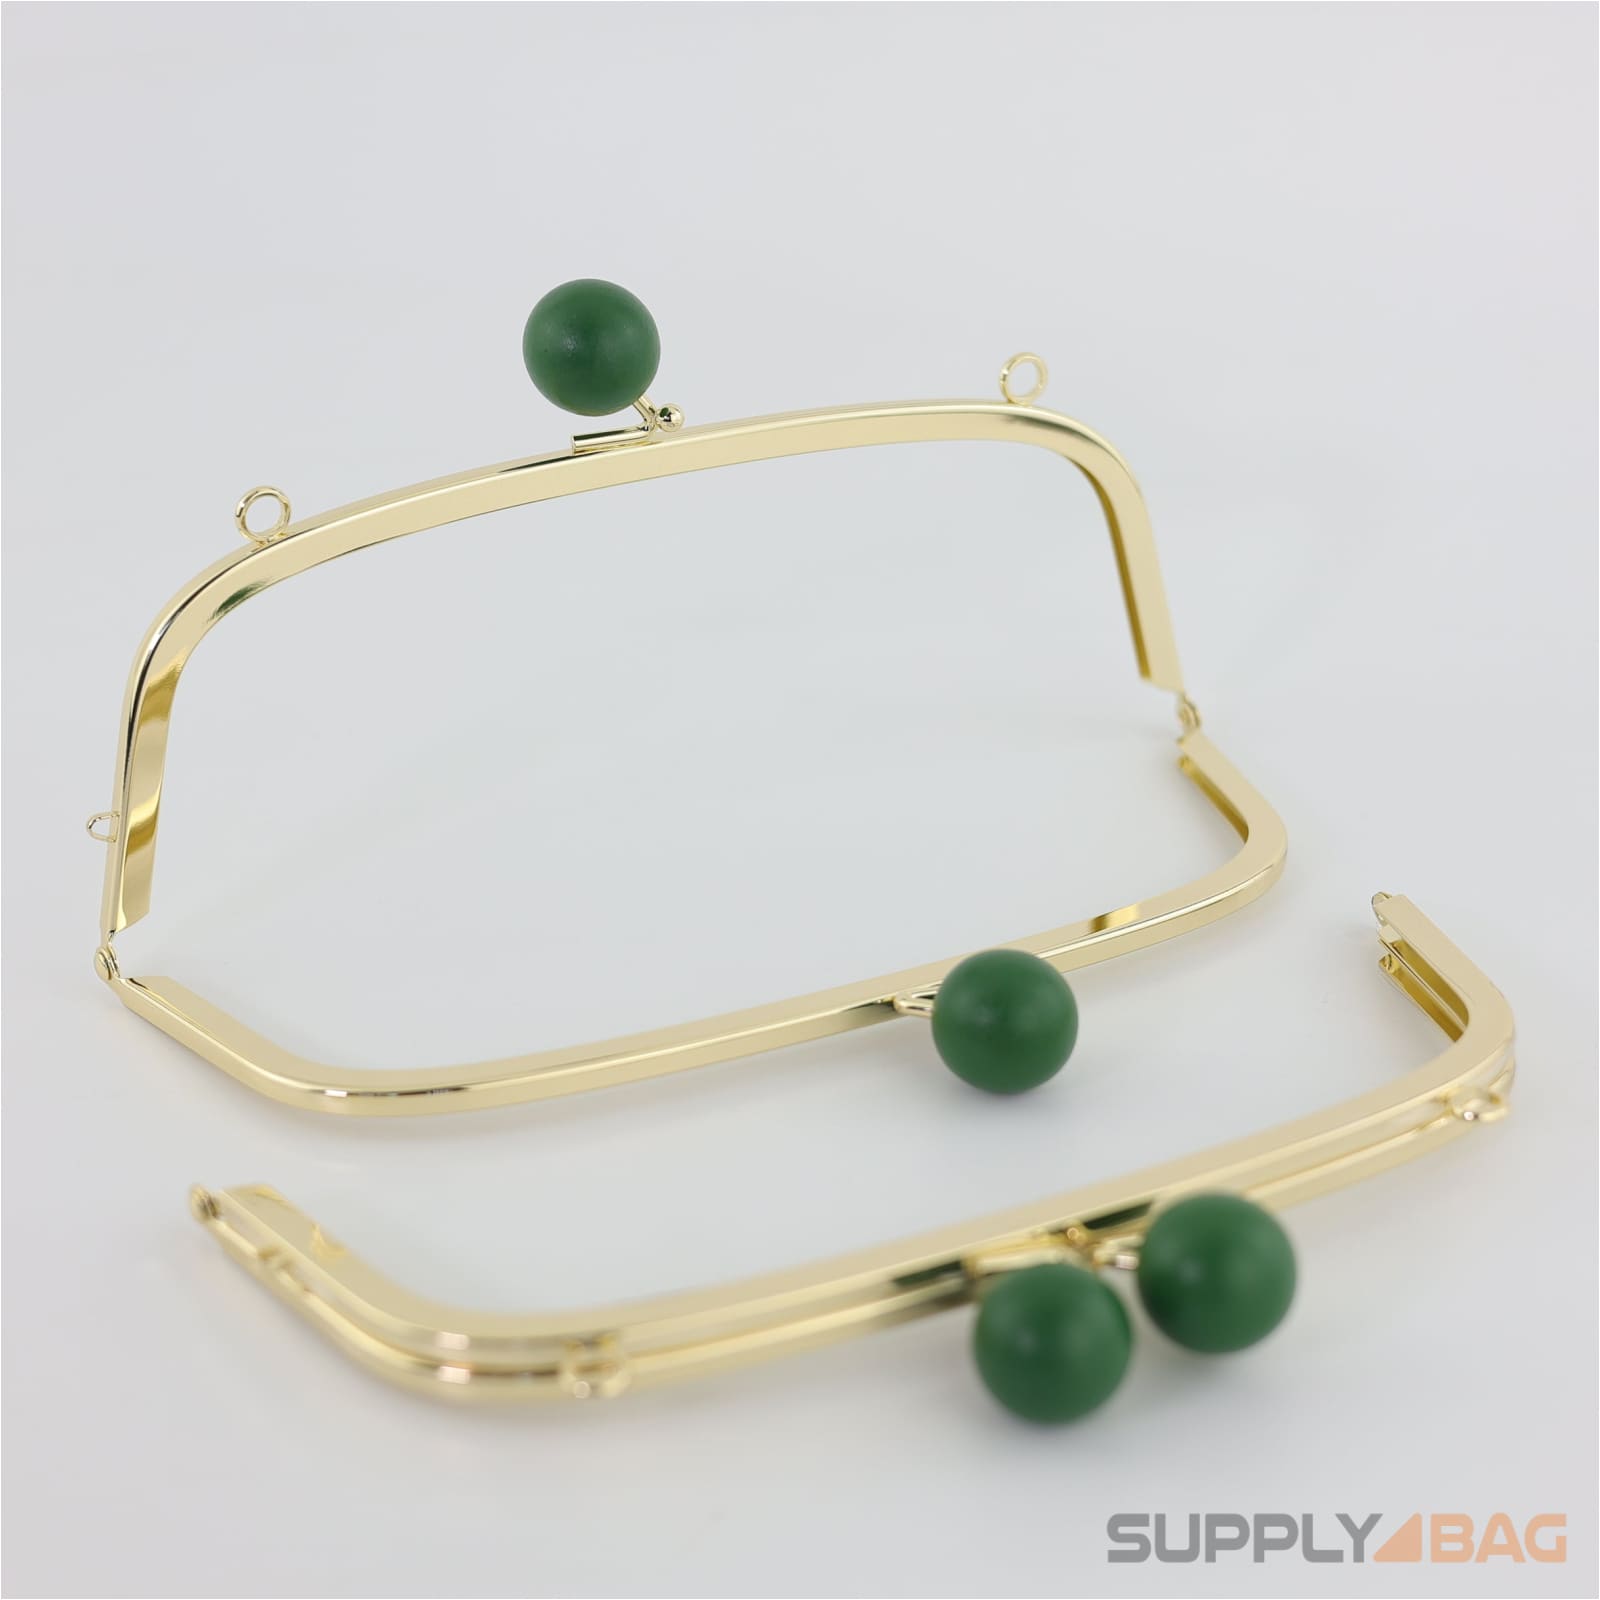 8.5 x 3 inch - kisslock clasp (emerald) gold metal purse frame with o